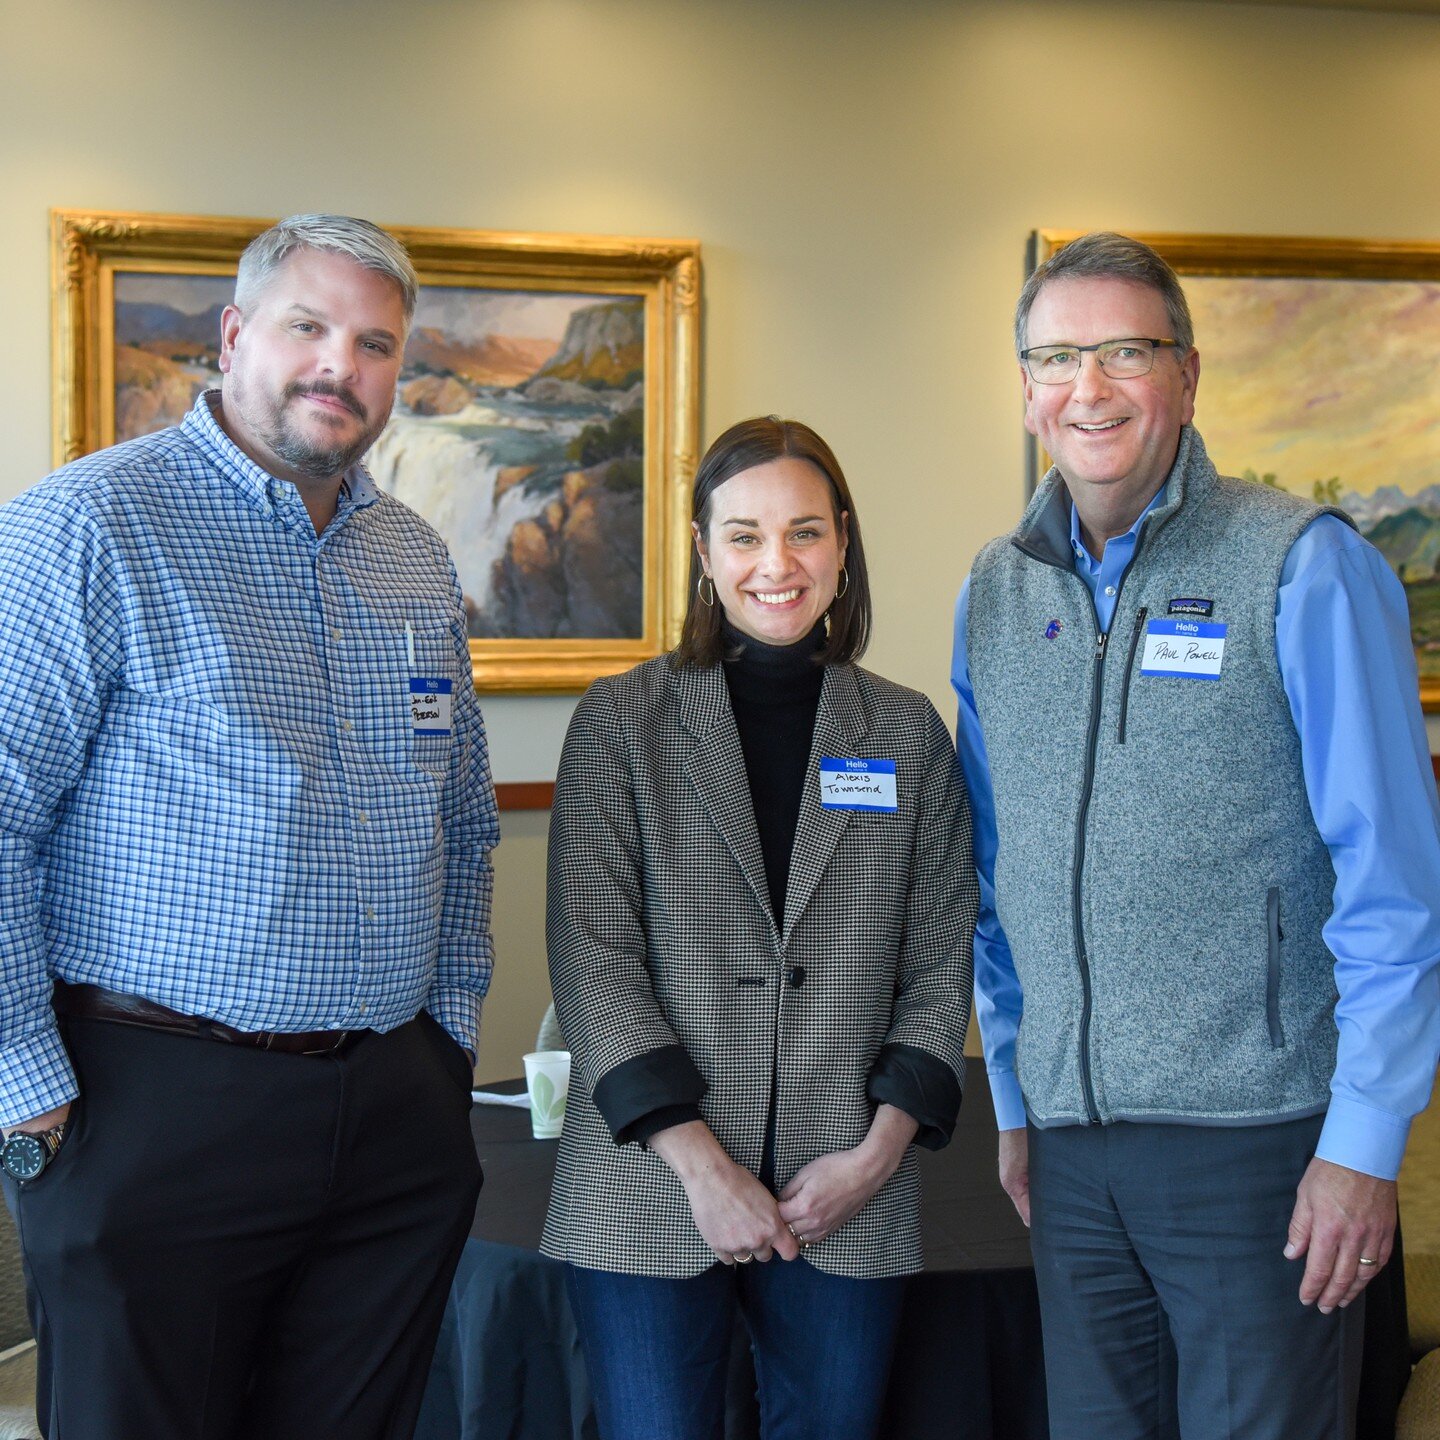 At today's @bomaidaho monthly luncheon, Jan-Erik Peterson (@esi.construction), Alexis Townsend (@lombardconradarchitects), and Paul Powell (@boisestateuniversity) presented Boise State's new Construction Management Building.

The building is the firs